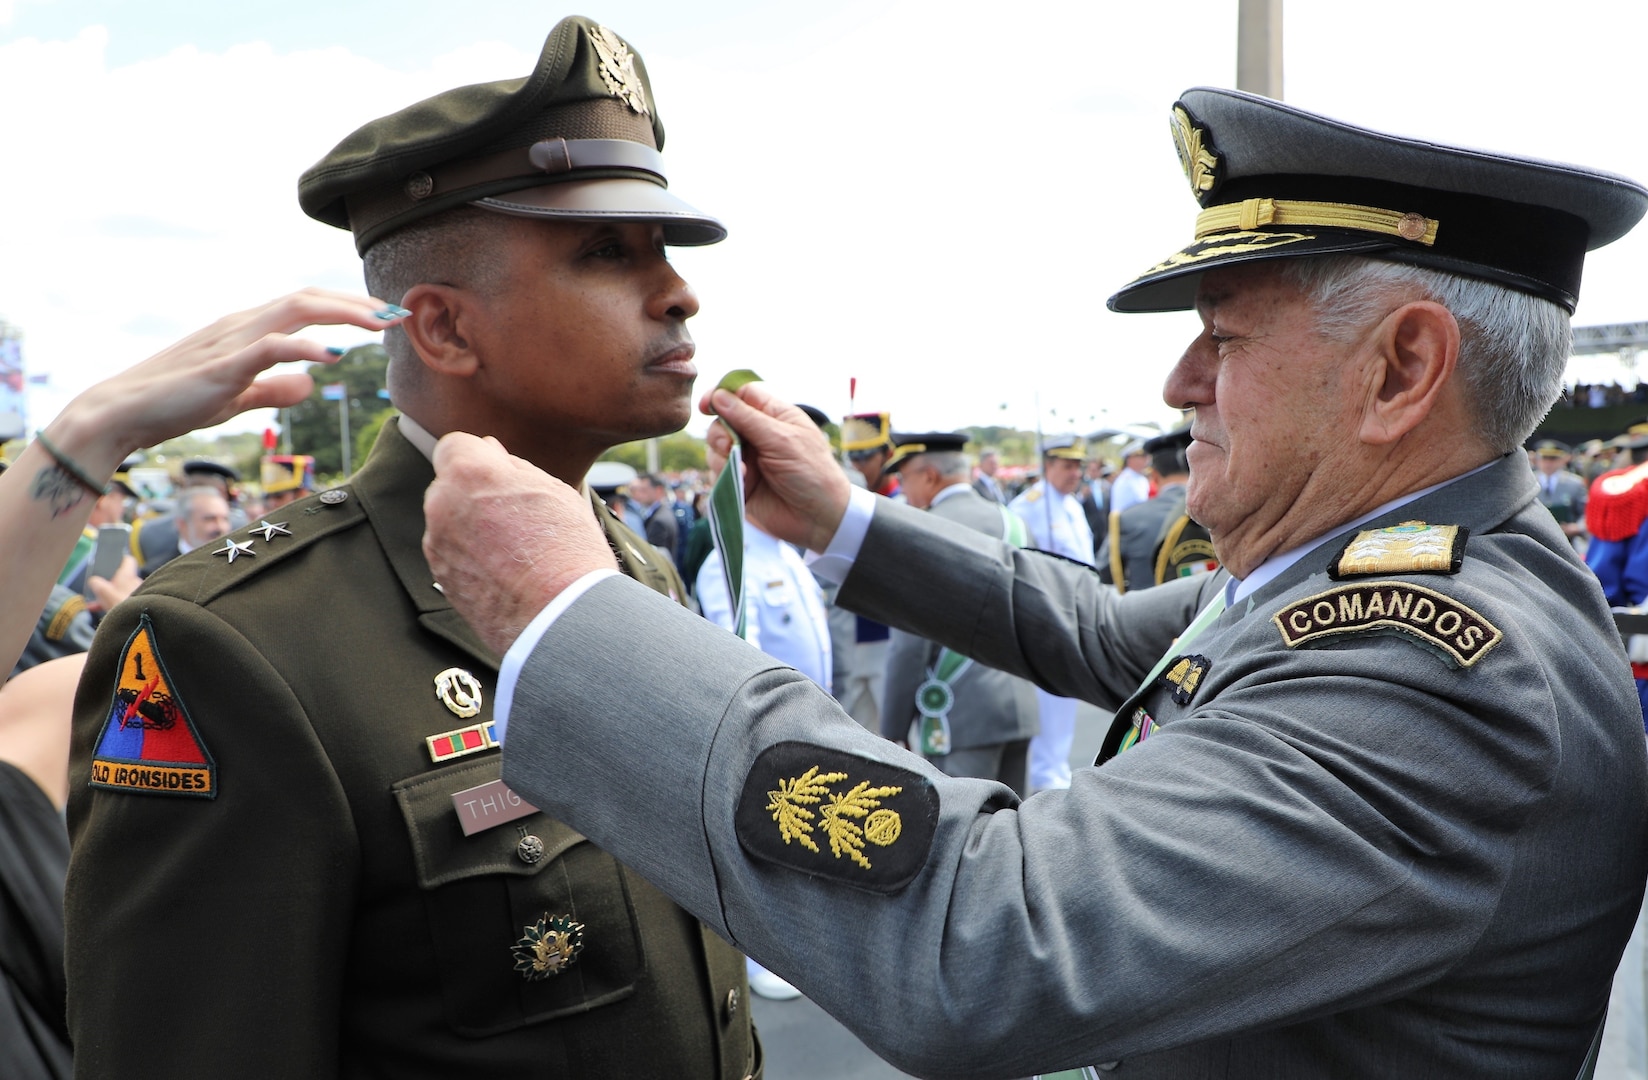 Army South CG presented Brazilian Order of Military Merit medal